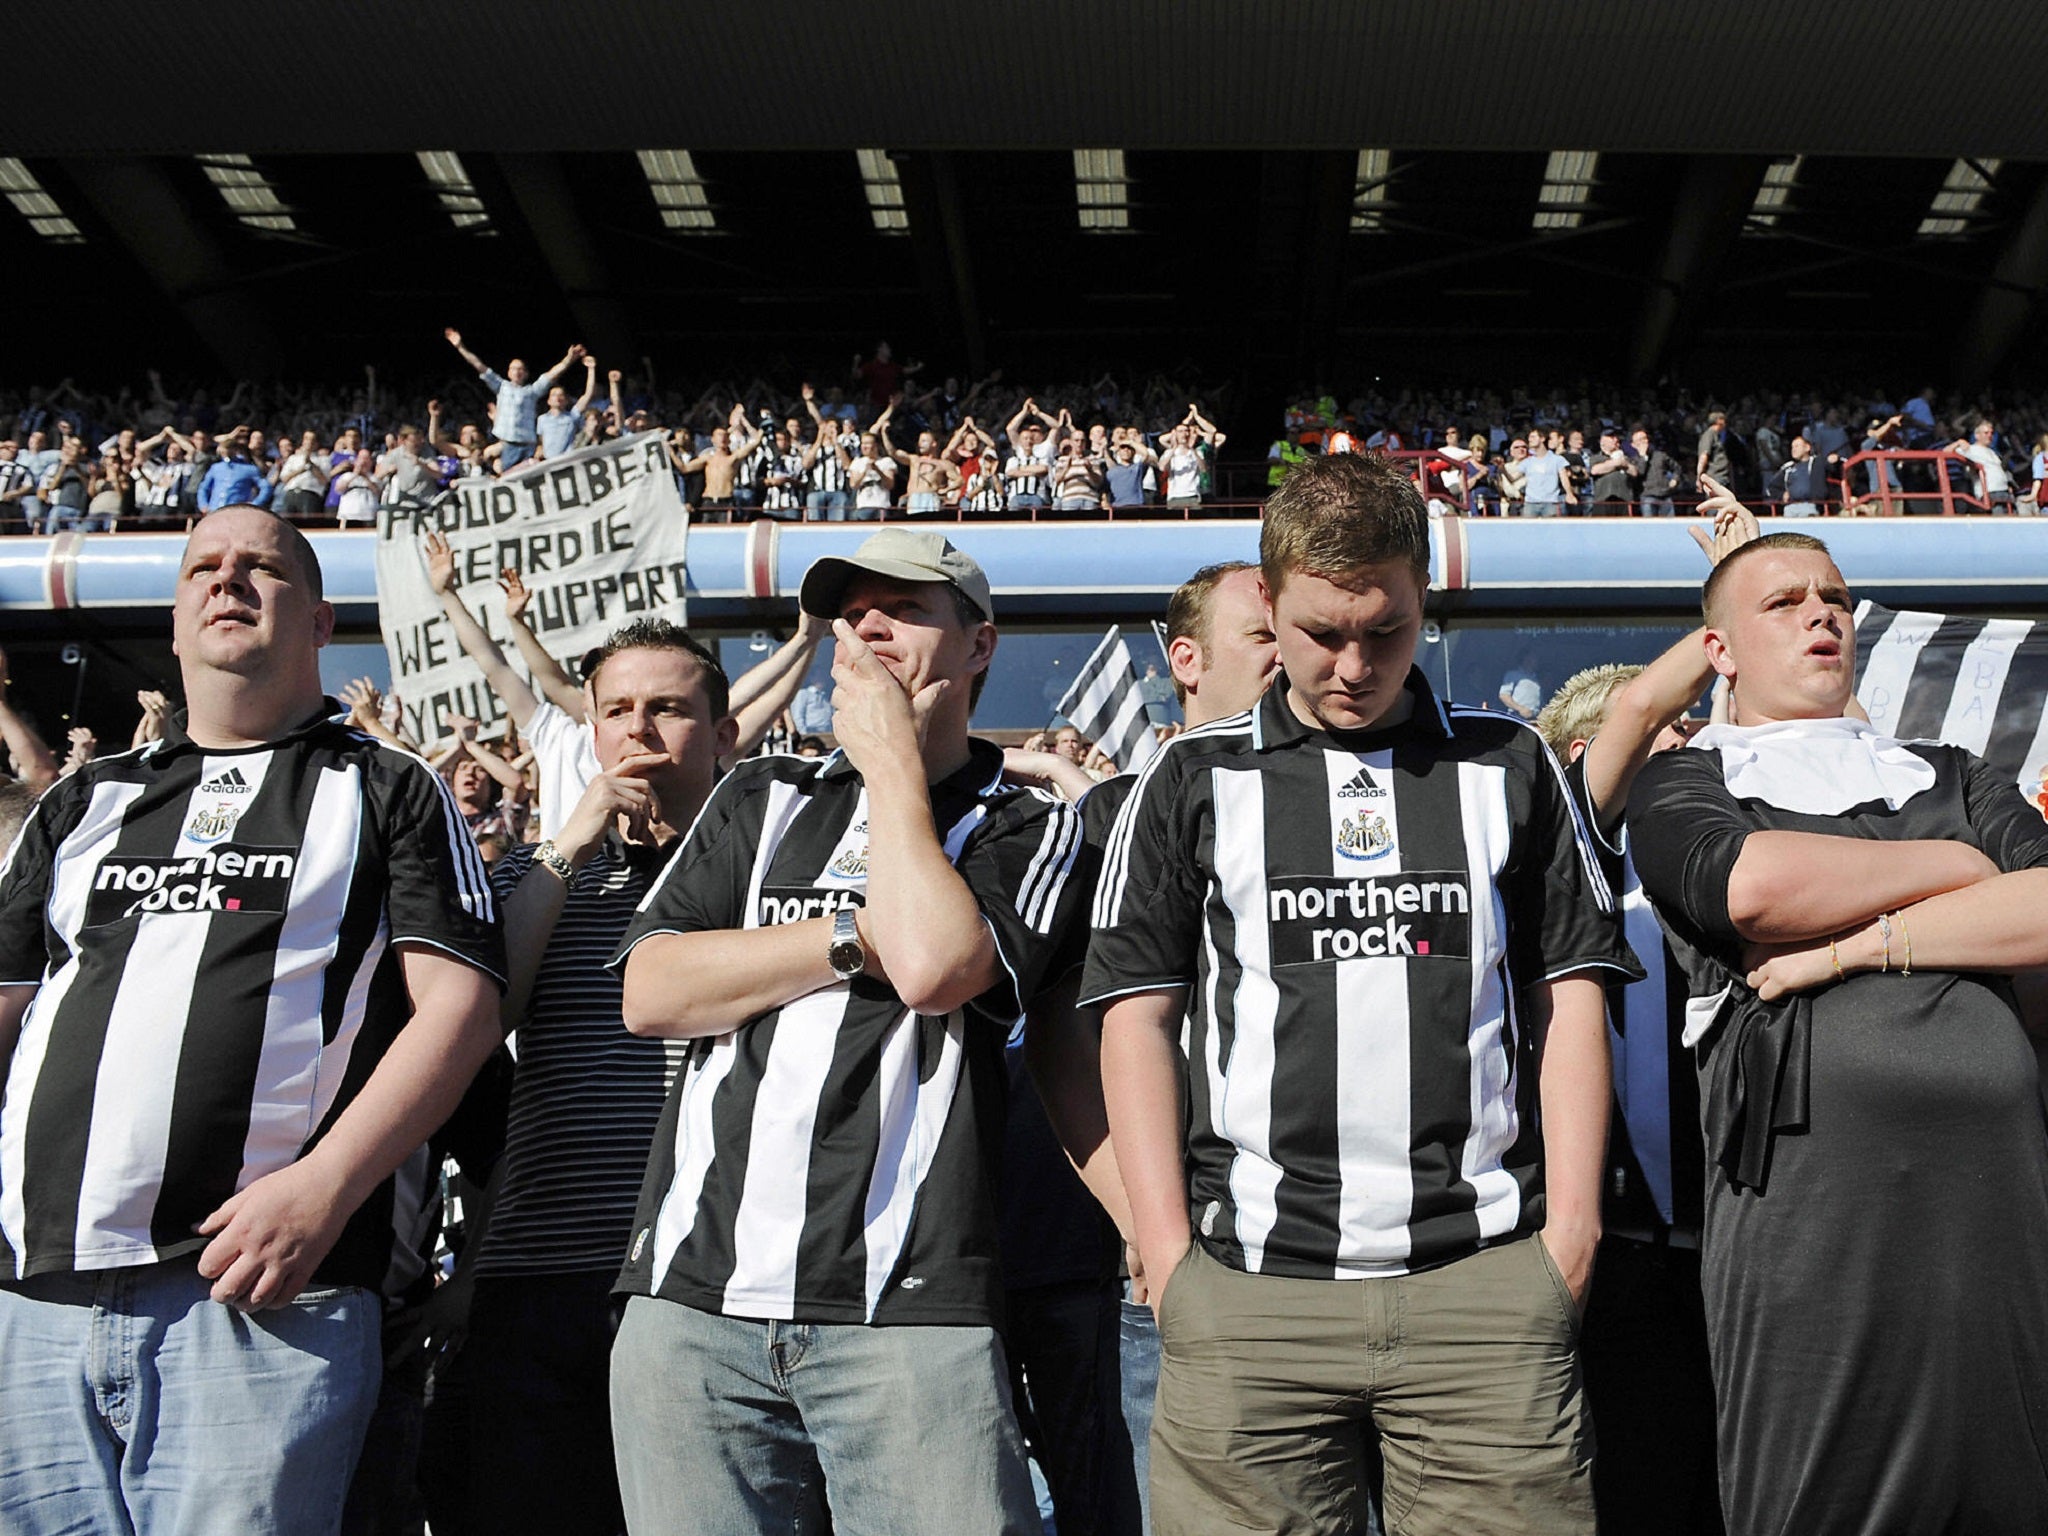 Newcastle fans couldn't get their heads around Villa's joy that day in 2009